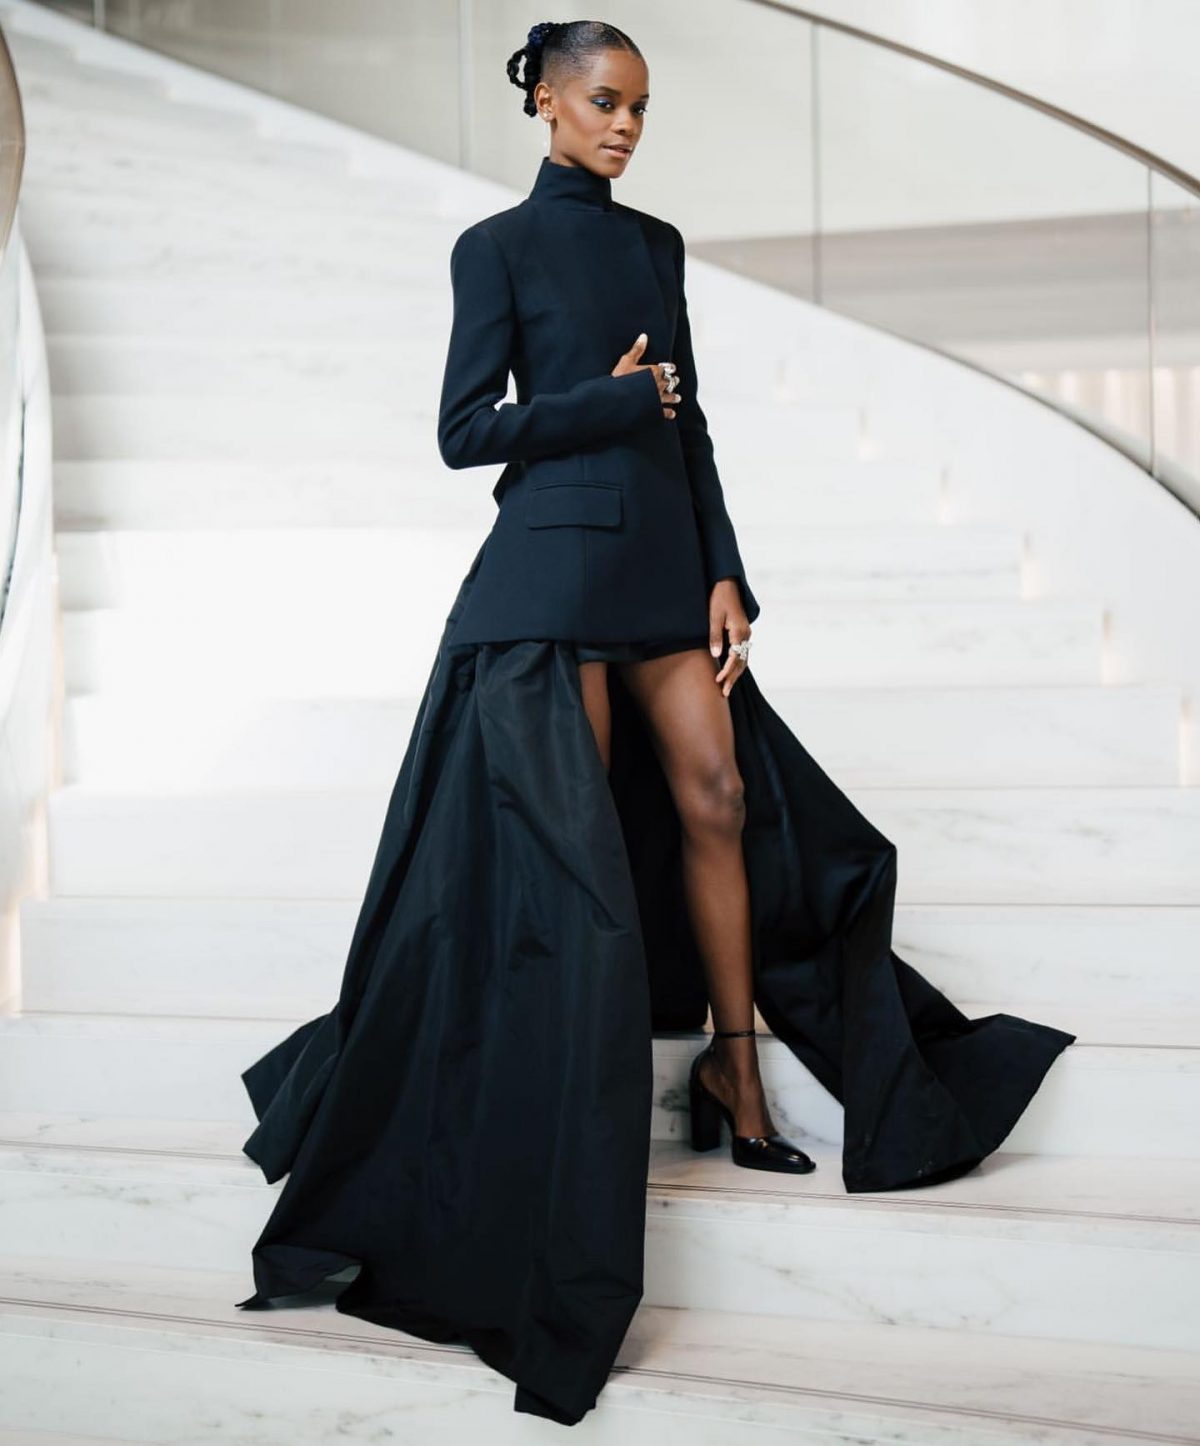 The Cannes Film Festival Fashion Flaunted Sophistication + More